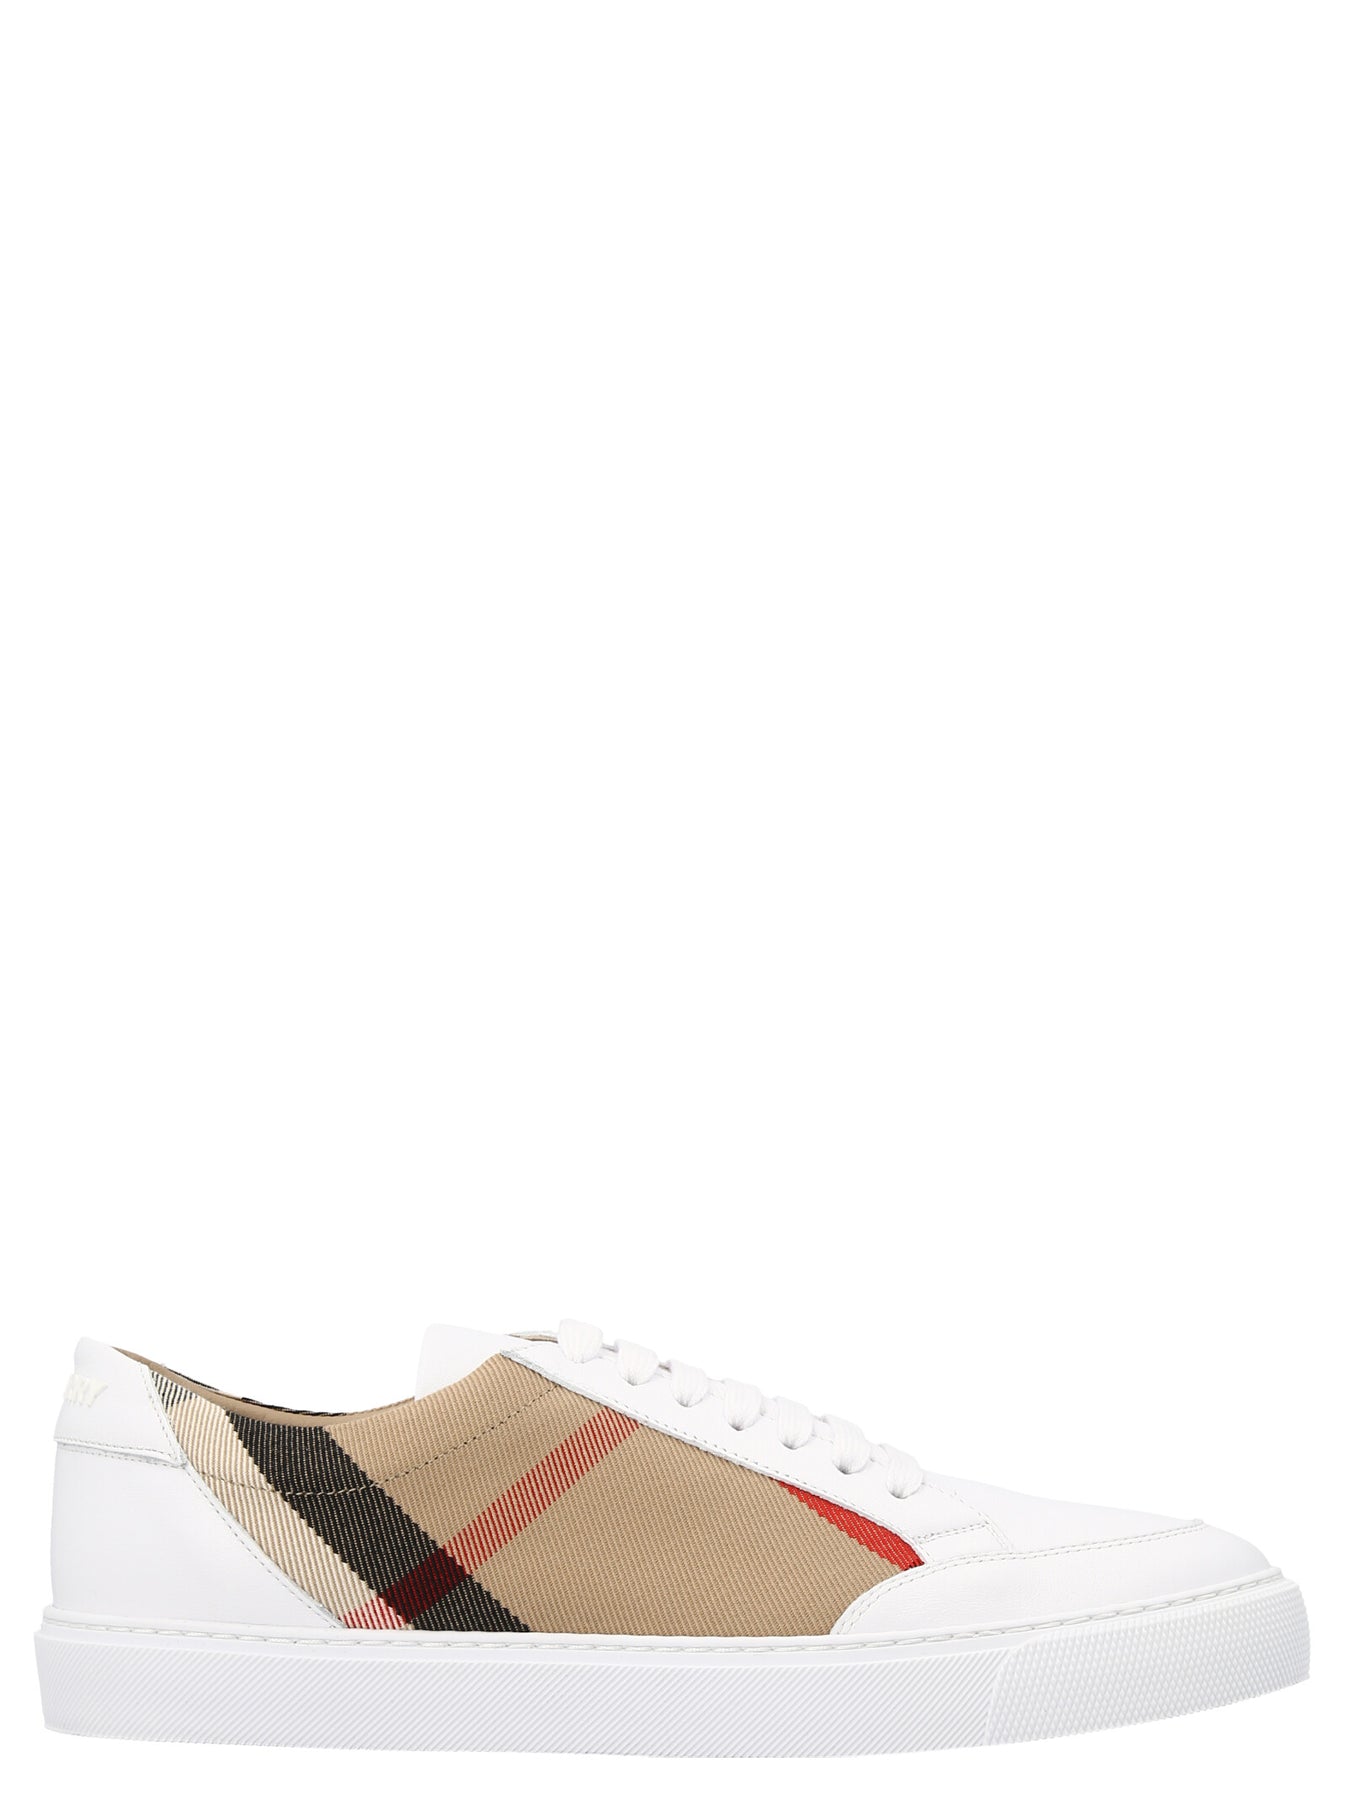 Shop Burberry New Salmond Sneakers Multicolor